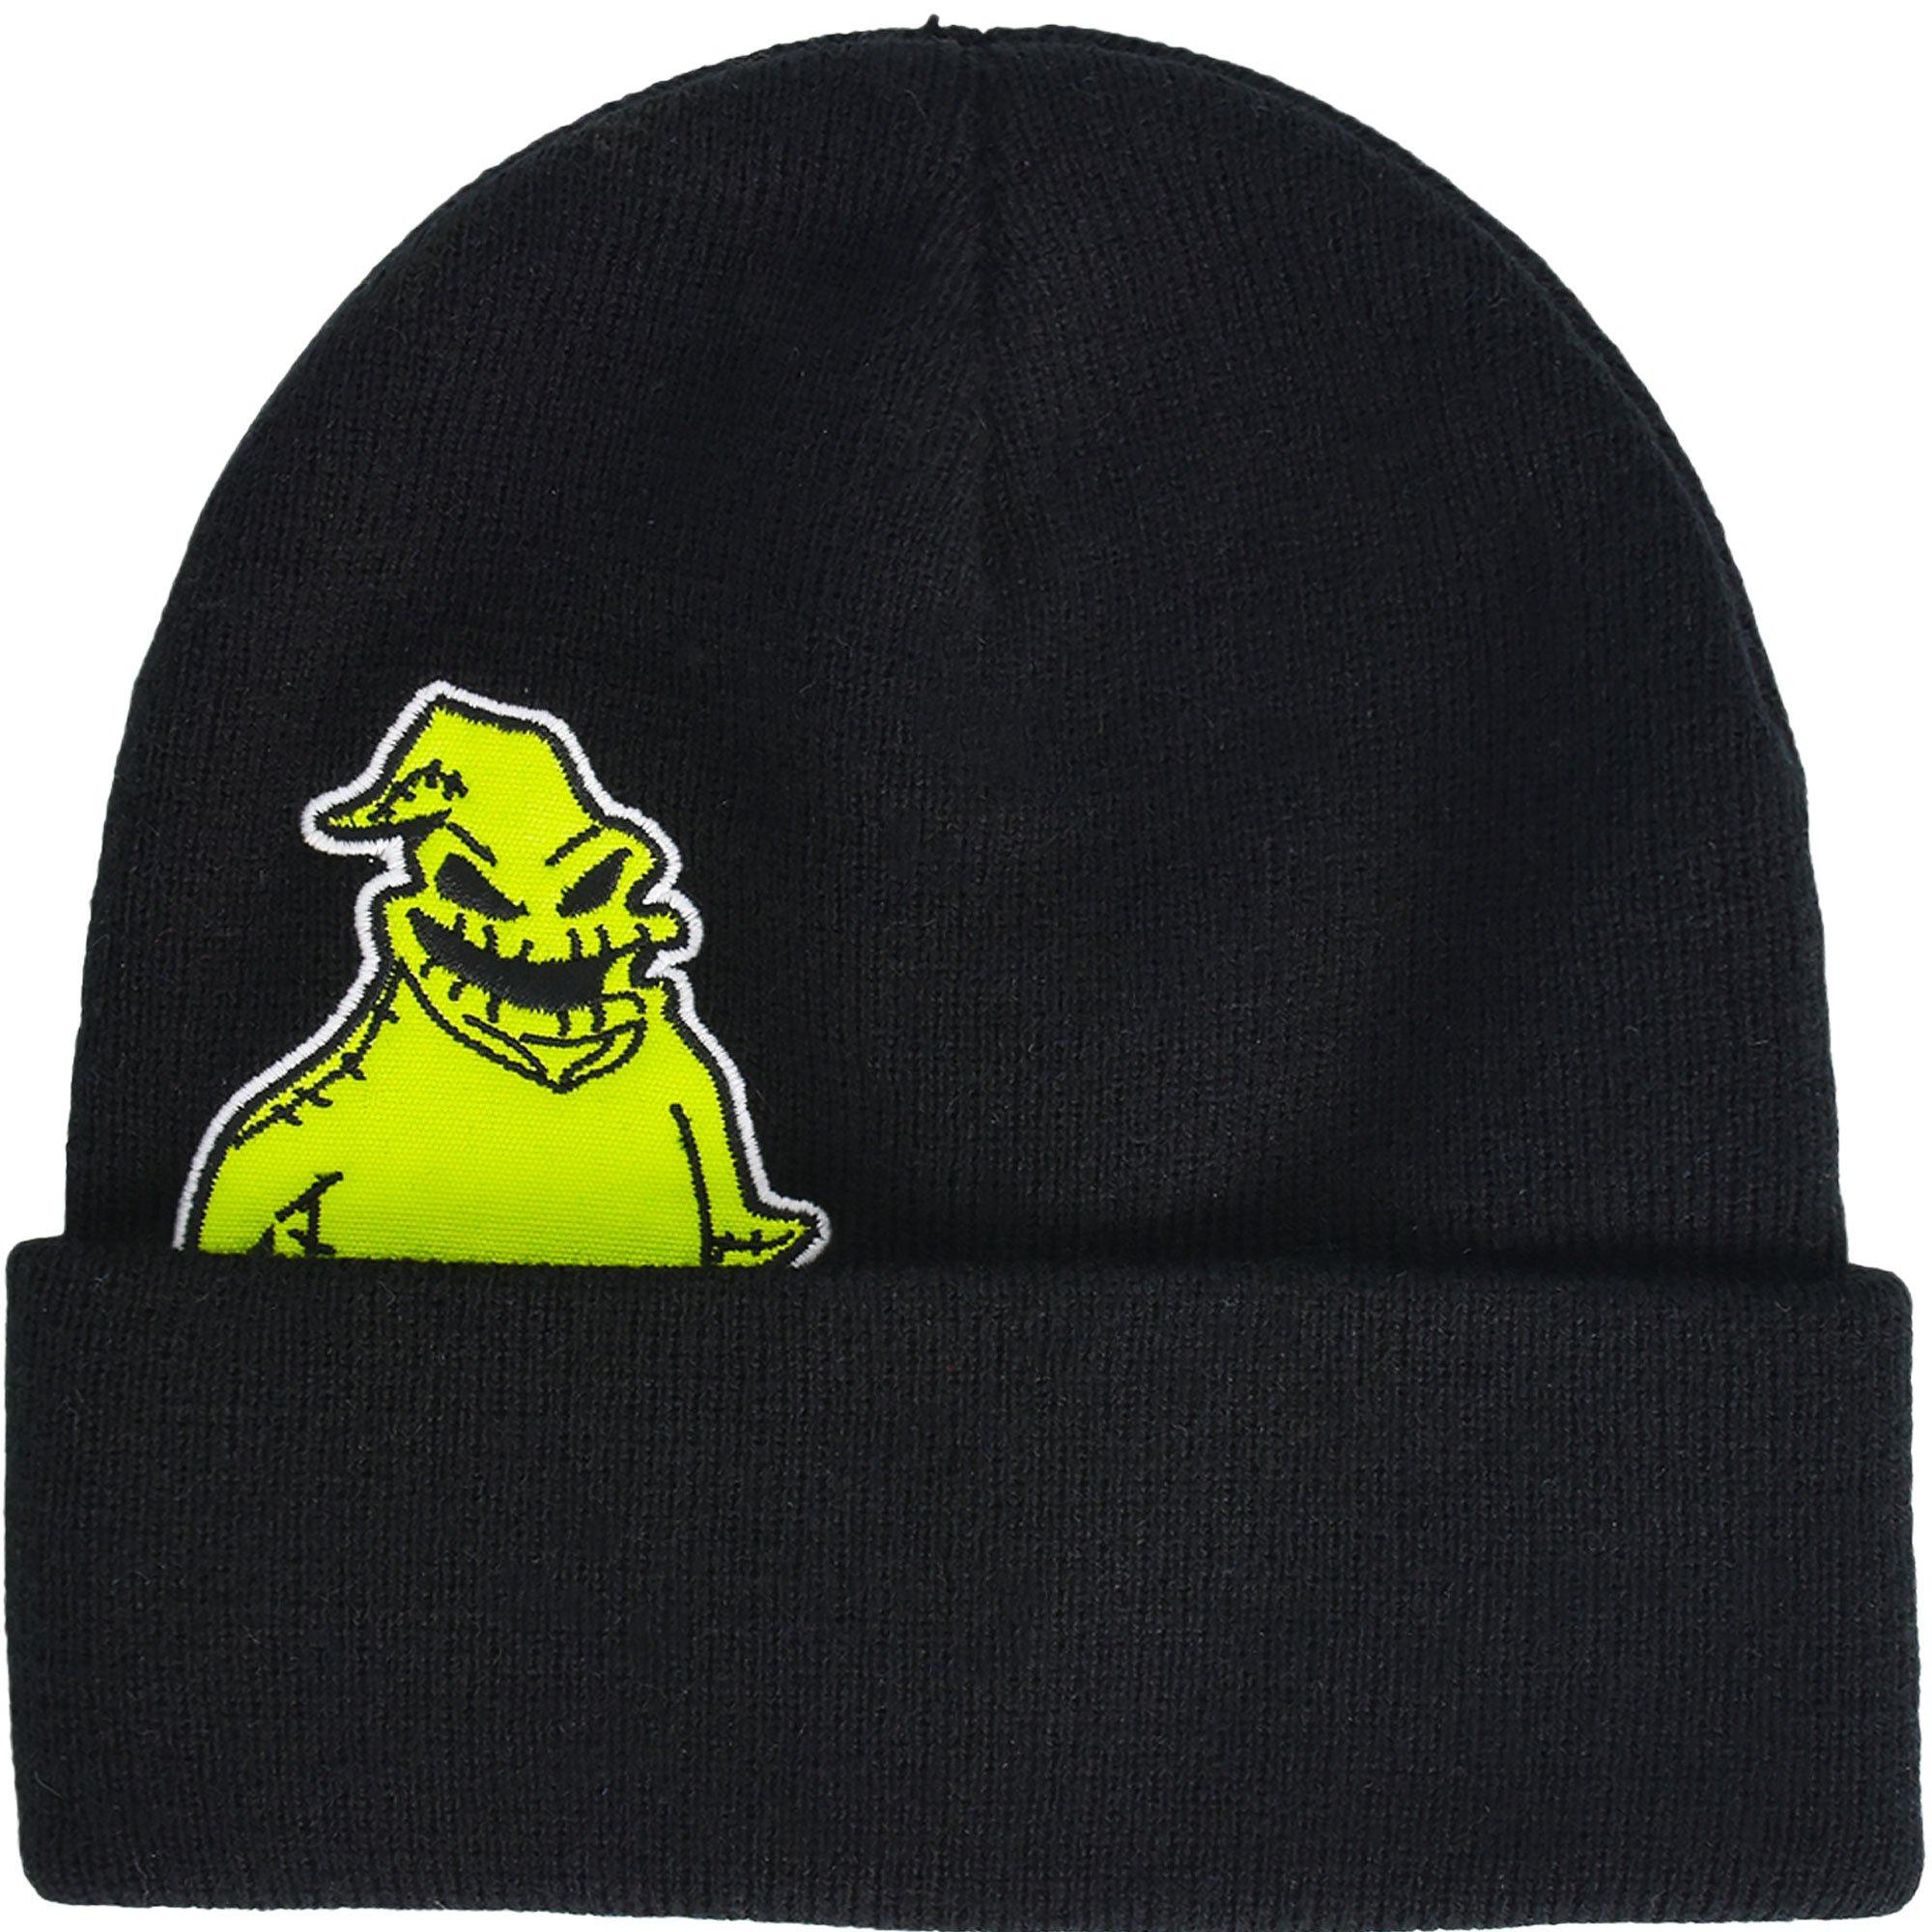 Black Embroidered Oogie Boogie Acrylic Knit Beanie - The Nightmare ...